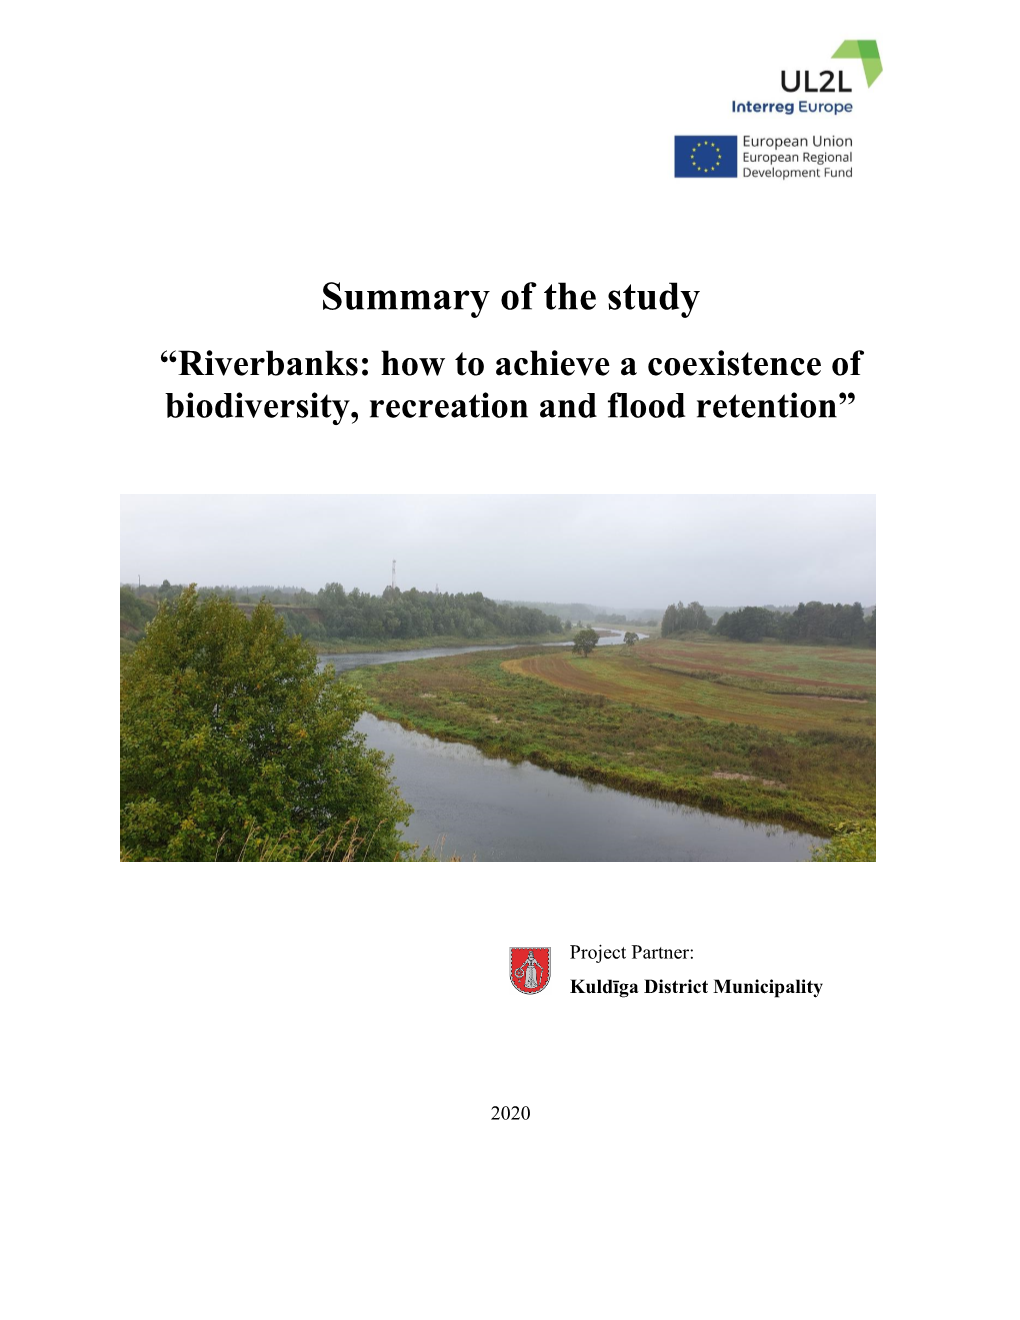 Summary of the Study “Riverbanks: How to Achieve a Coexistence of Biodiversity, Recreation and Flood Retention”